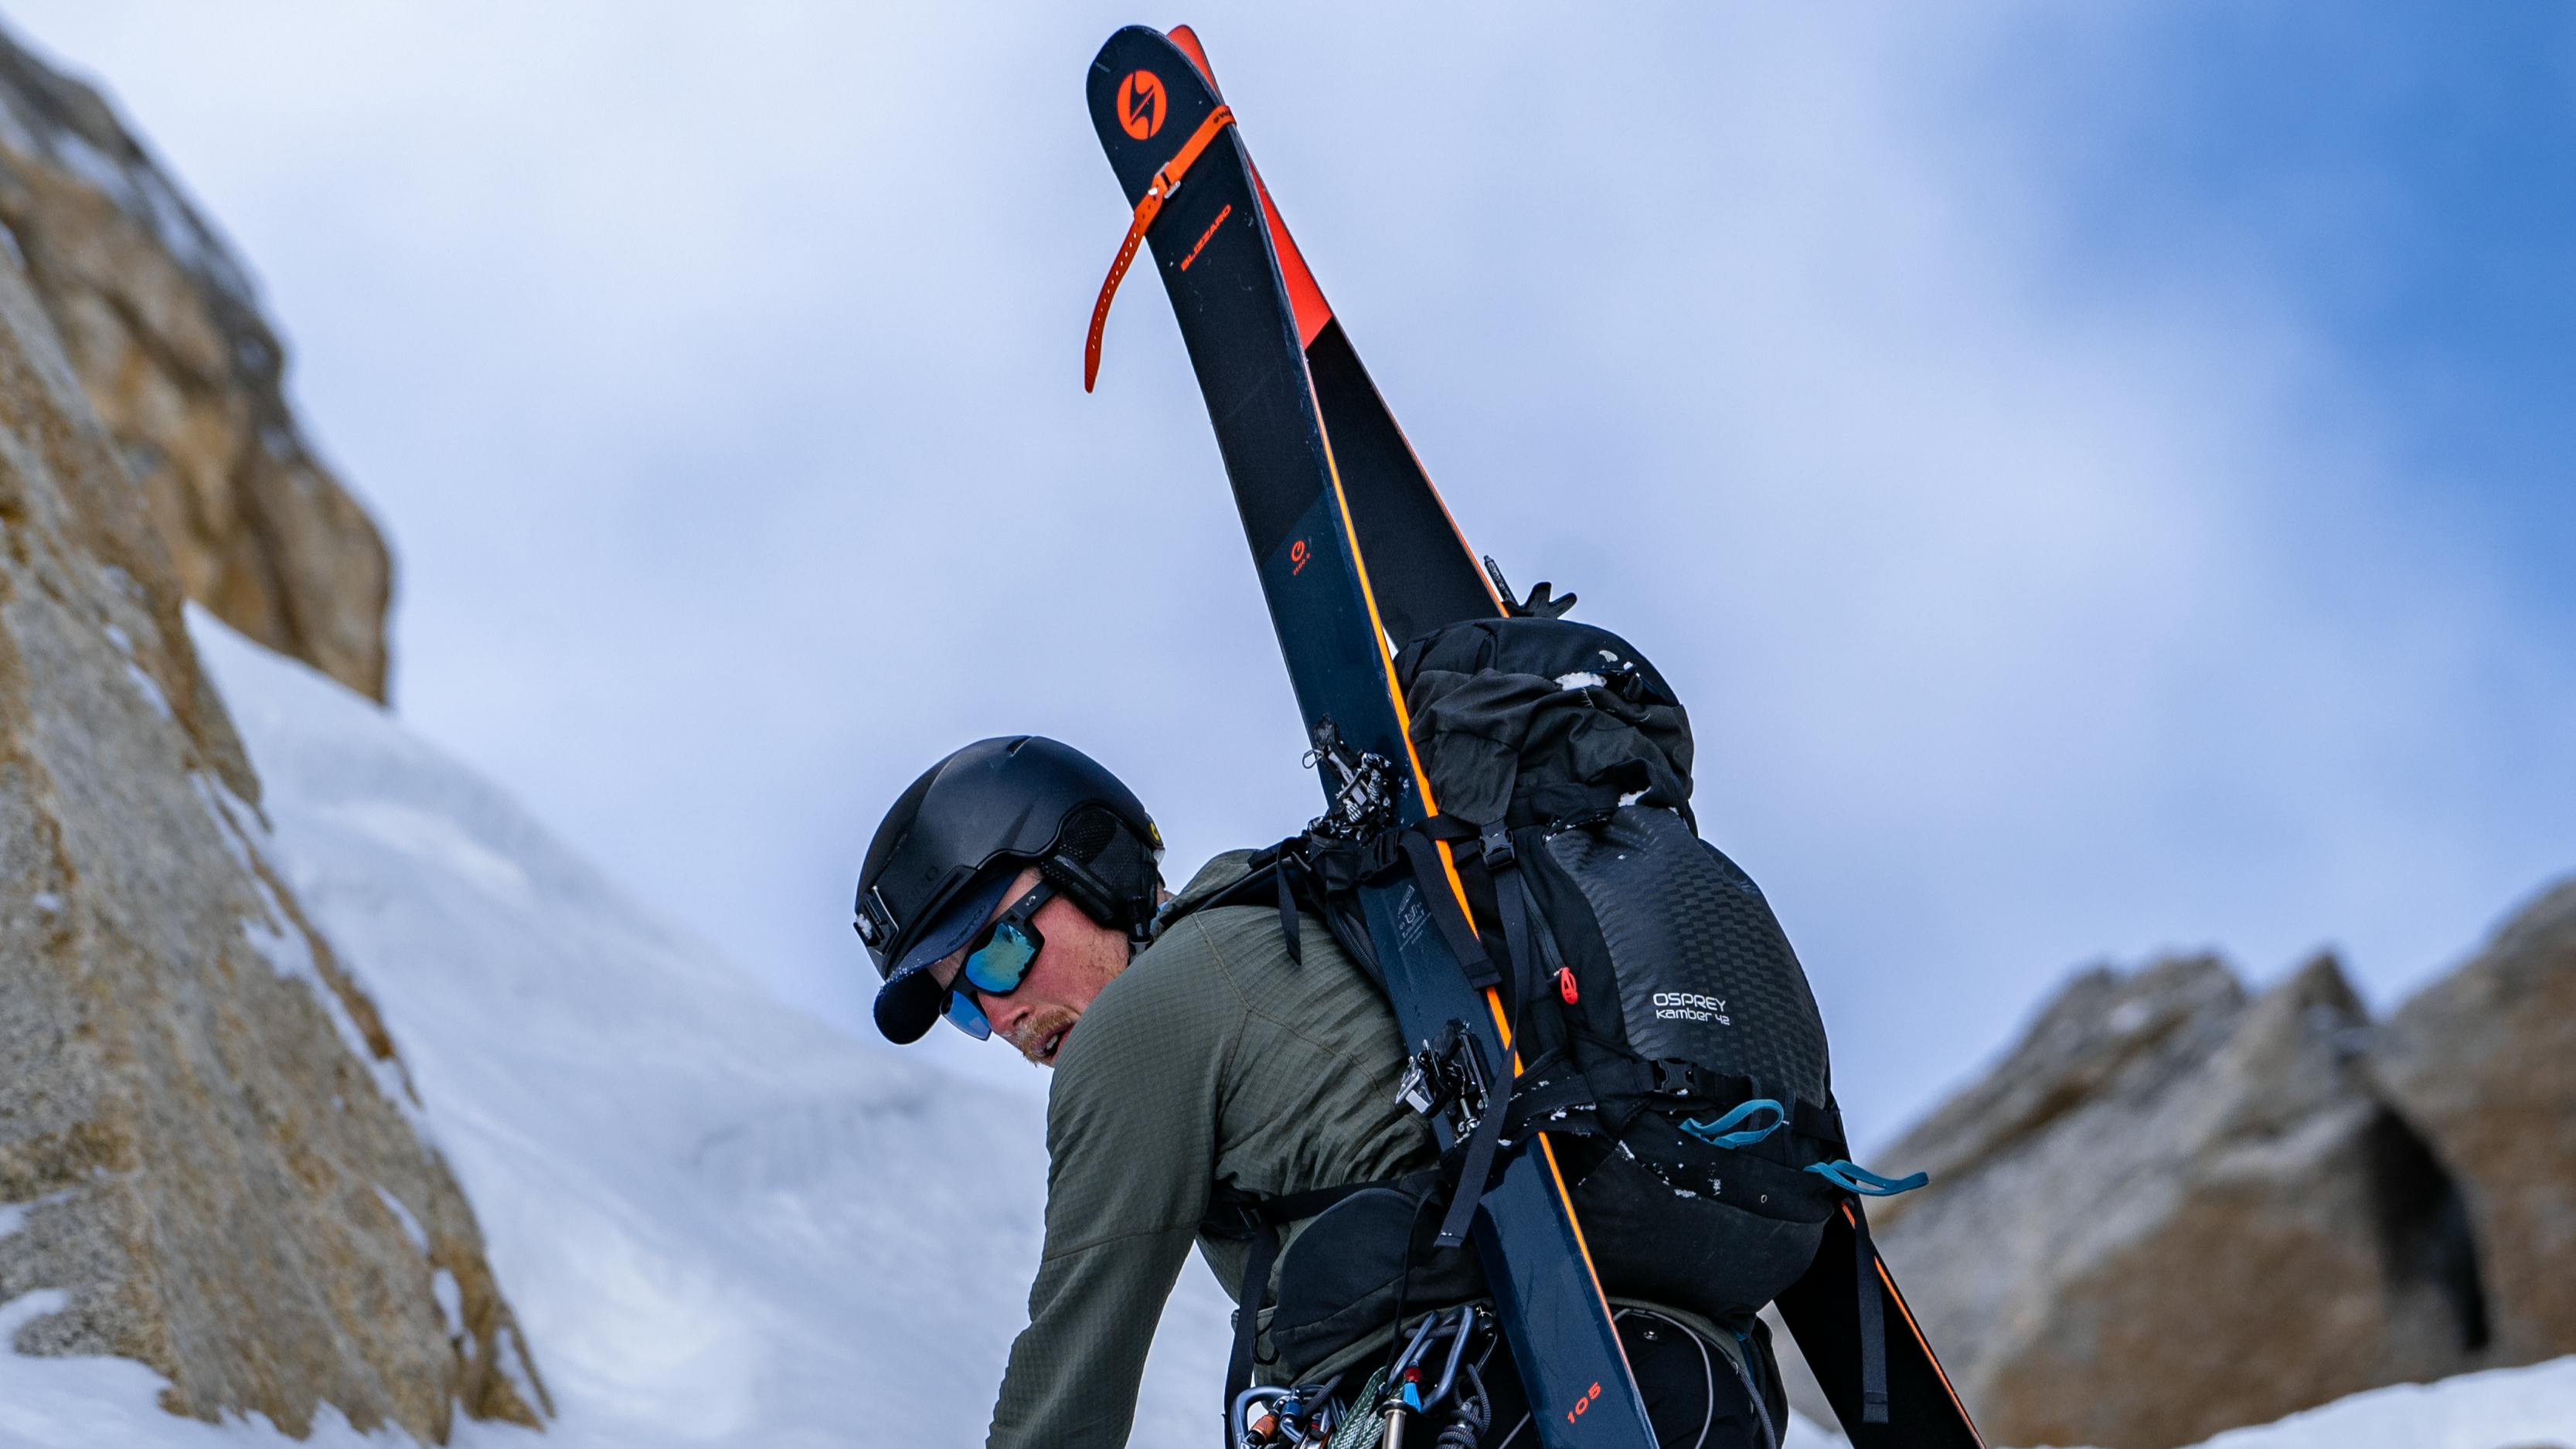 A skier hiking up a mountain with his Blizzard skis on his back.